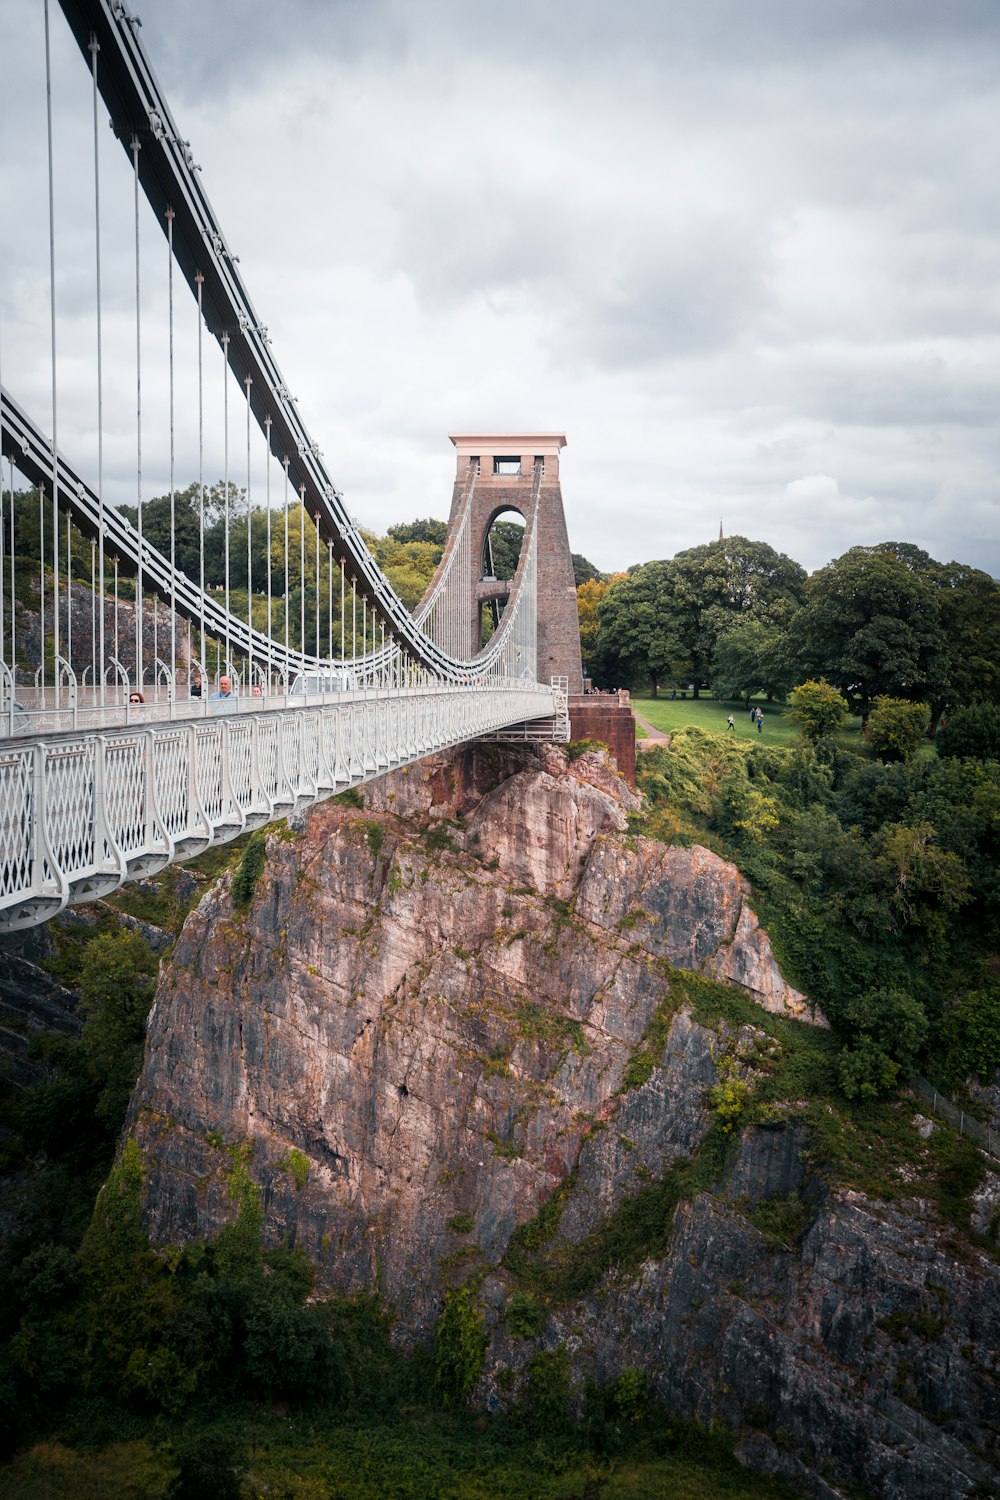 a suspension bridge spanning over a large body of water